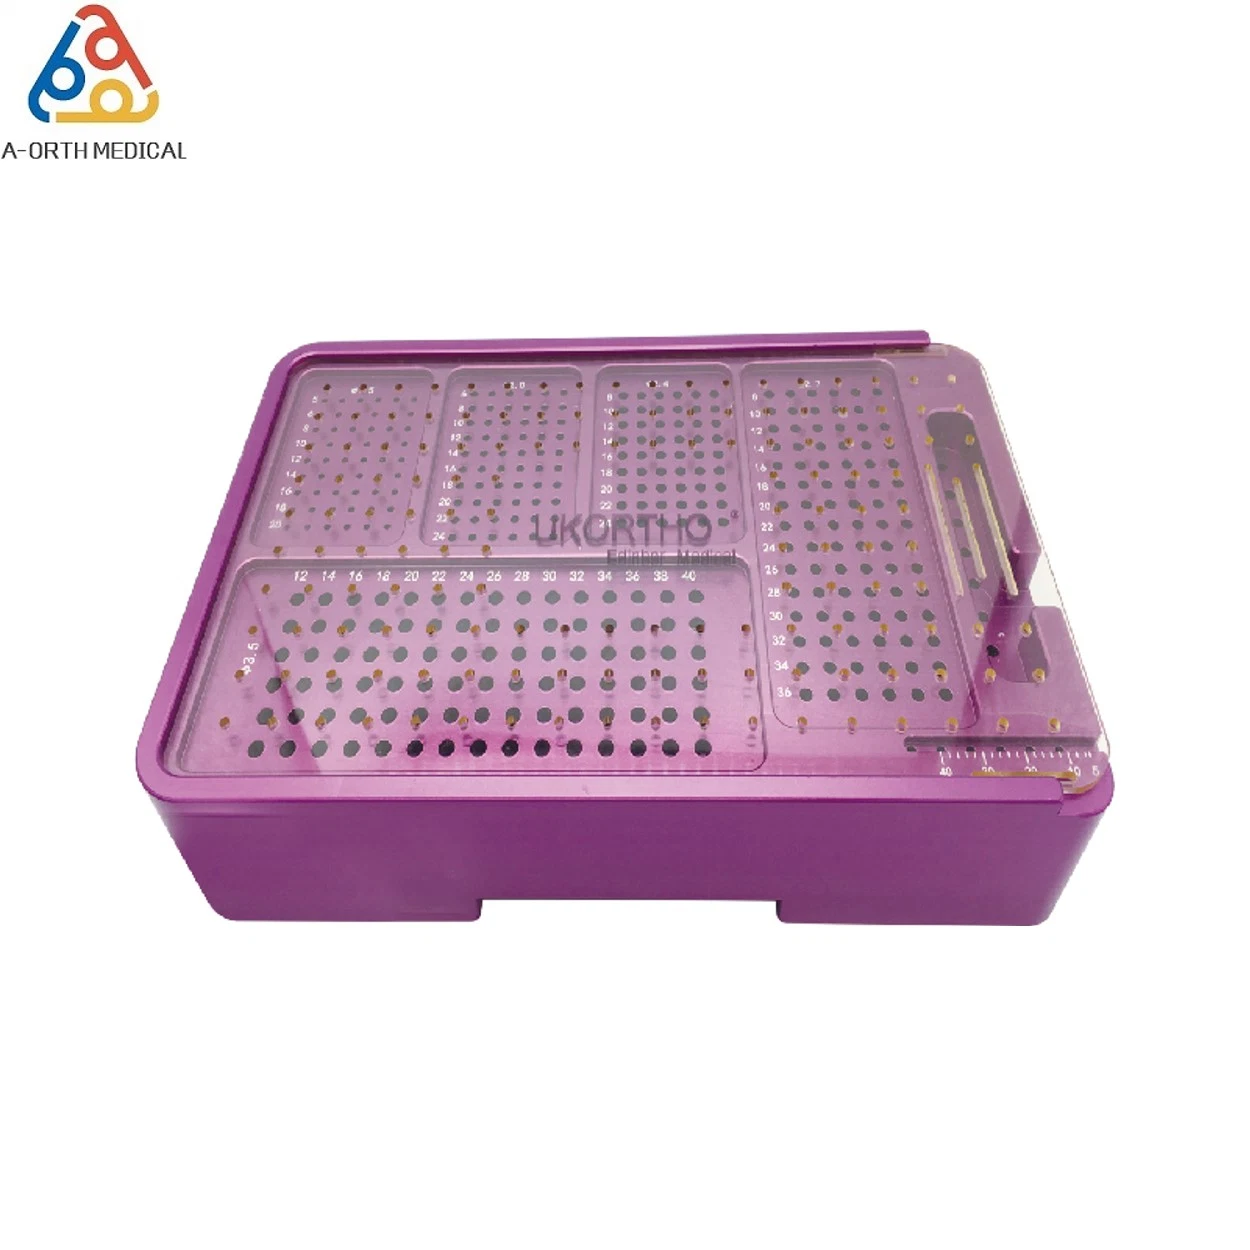 Polymer Medical Instrument Box of Surgical Orthopedic Instrument Set and Screws